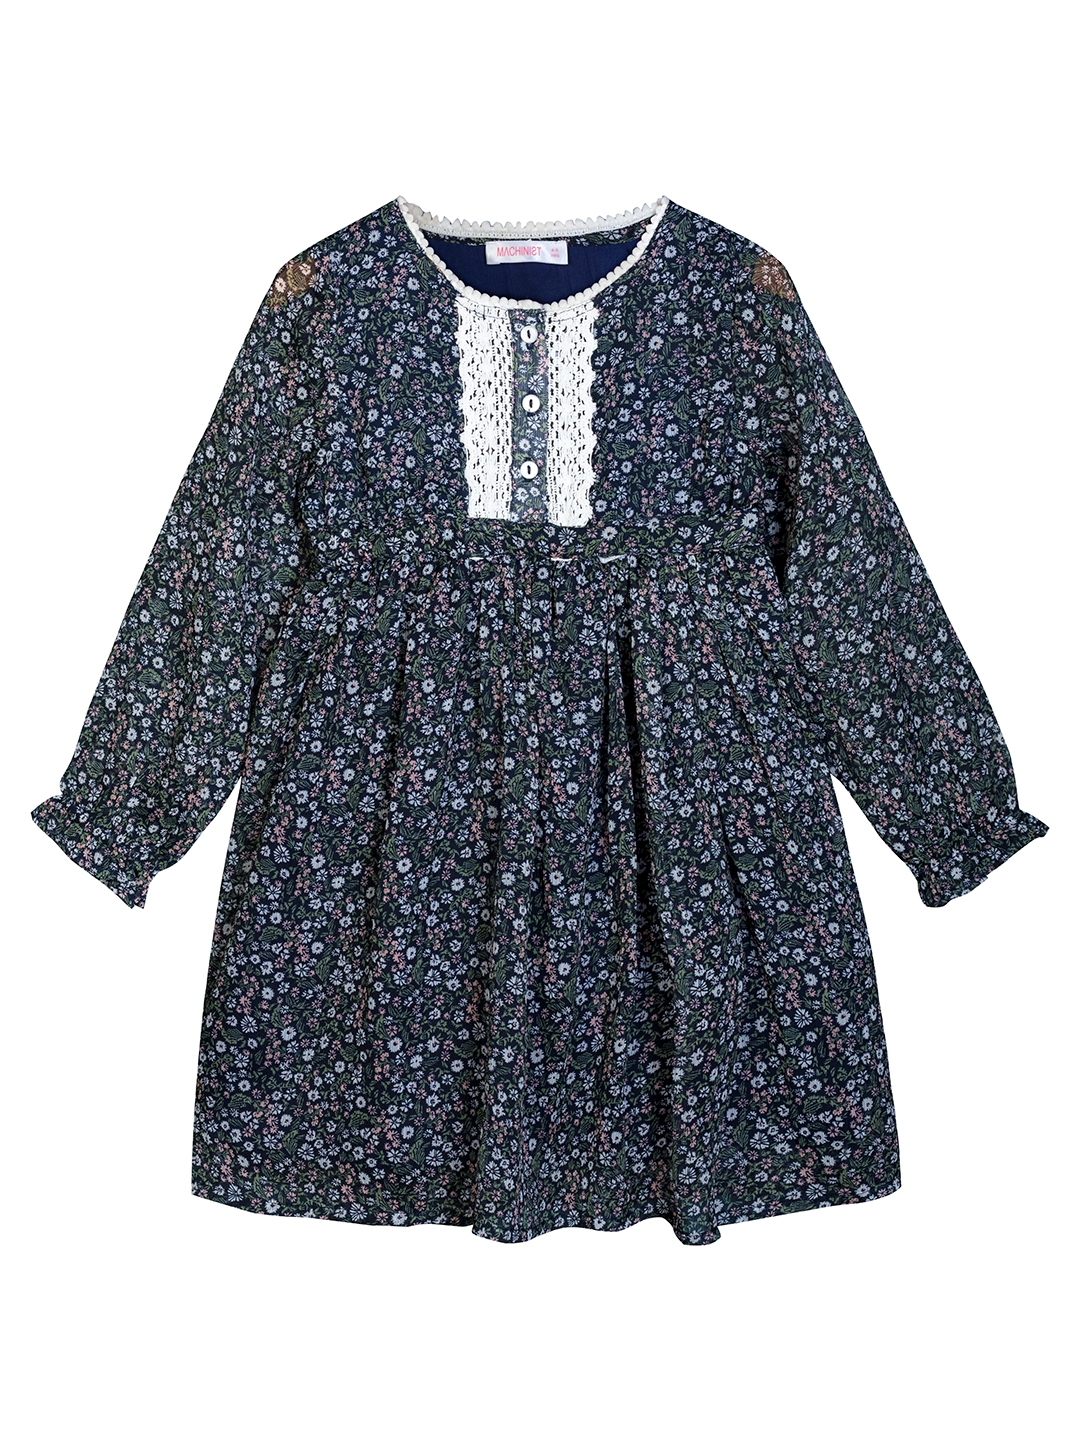 Budding Bees Girls Floral Polyester Dress